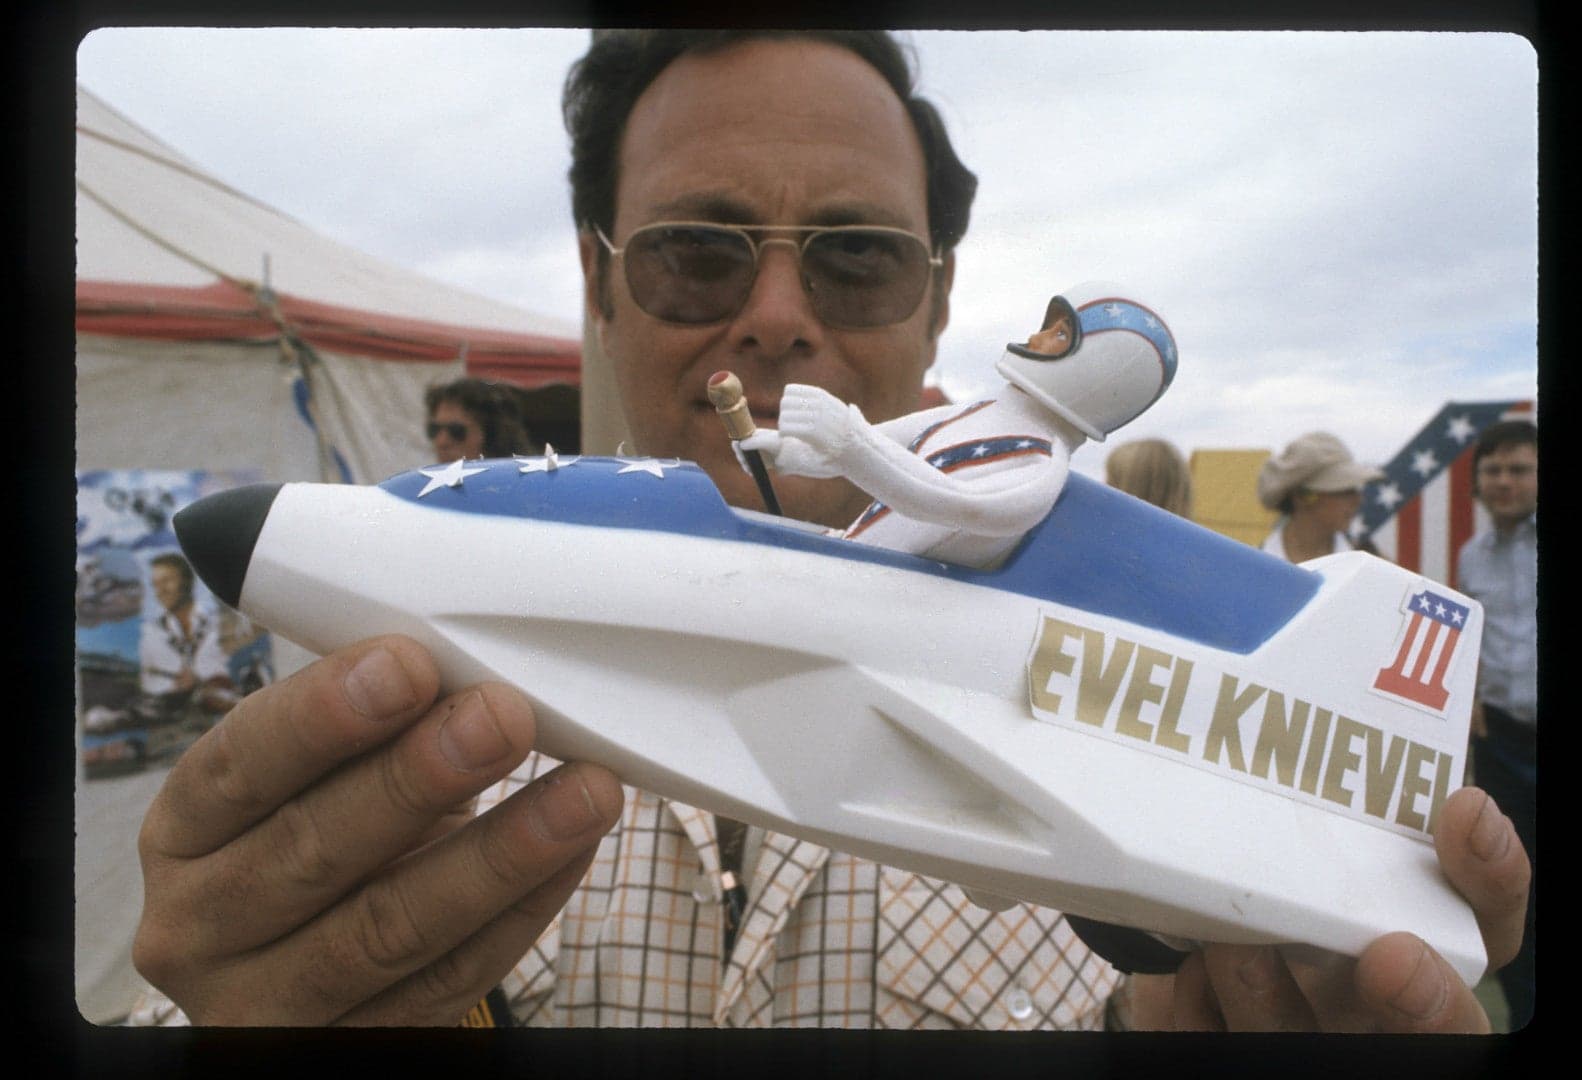 By Restaging an Evel Knievel Stunt, One Man Can Redeem His Father